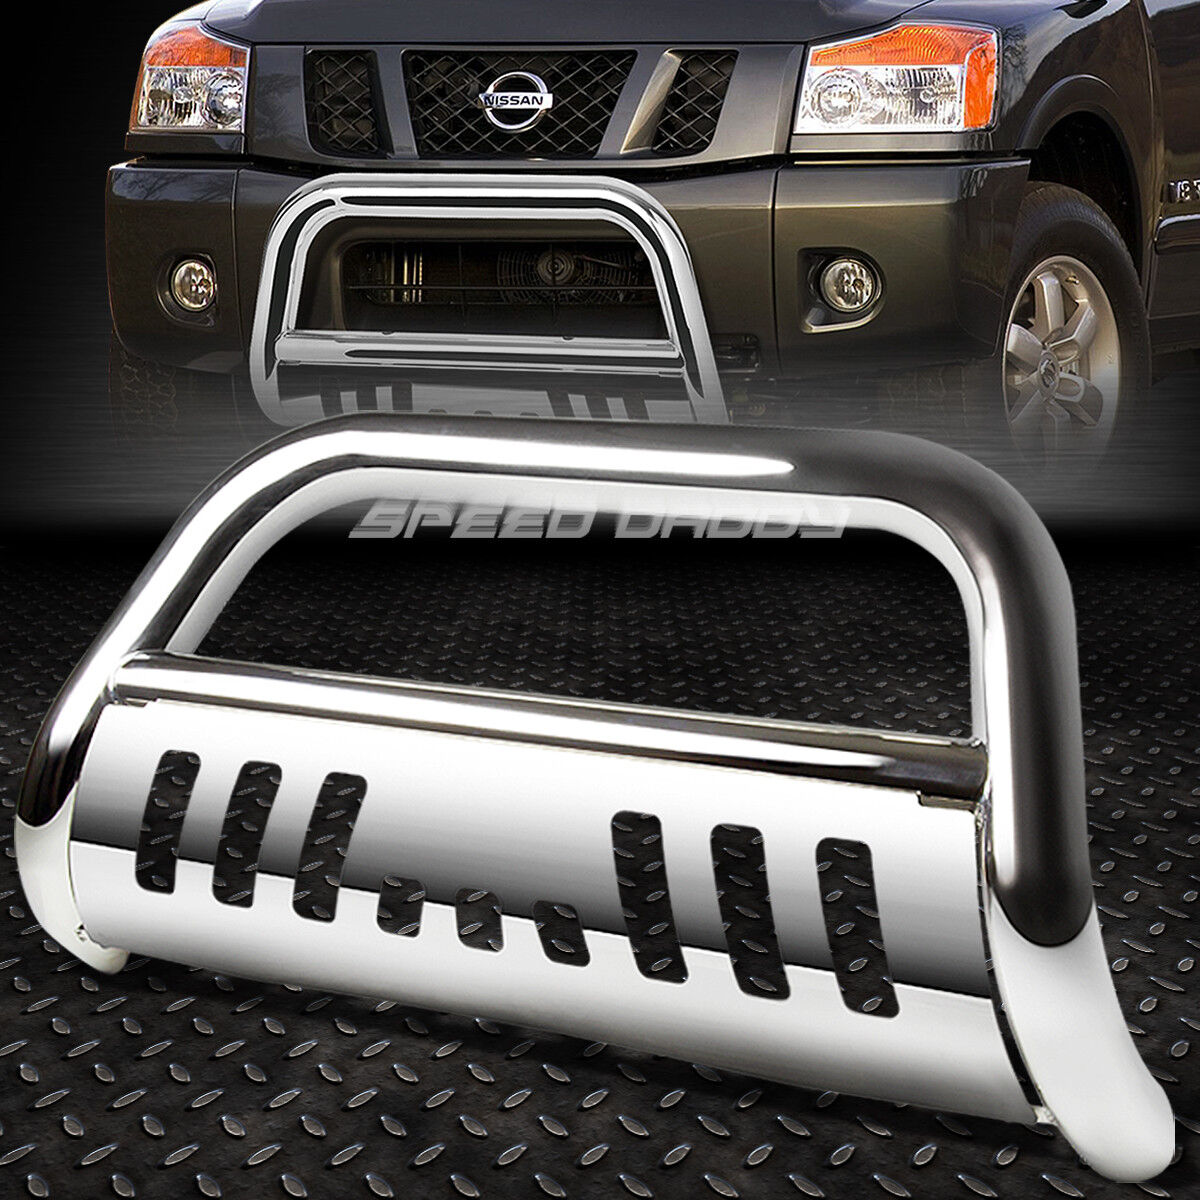 FOR 05-16 NISSAN FRONTIER/PATHFINDER CHROME BULL BAR PUSH BUMPER GRILLE GUARD